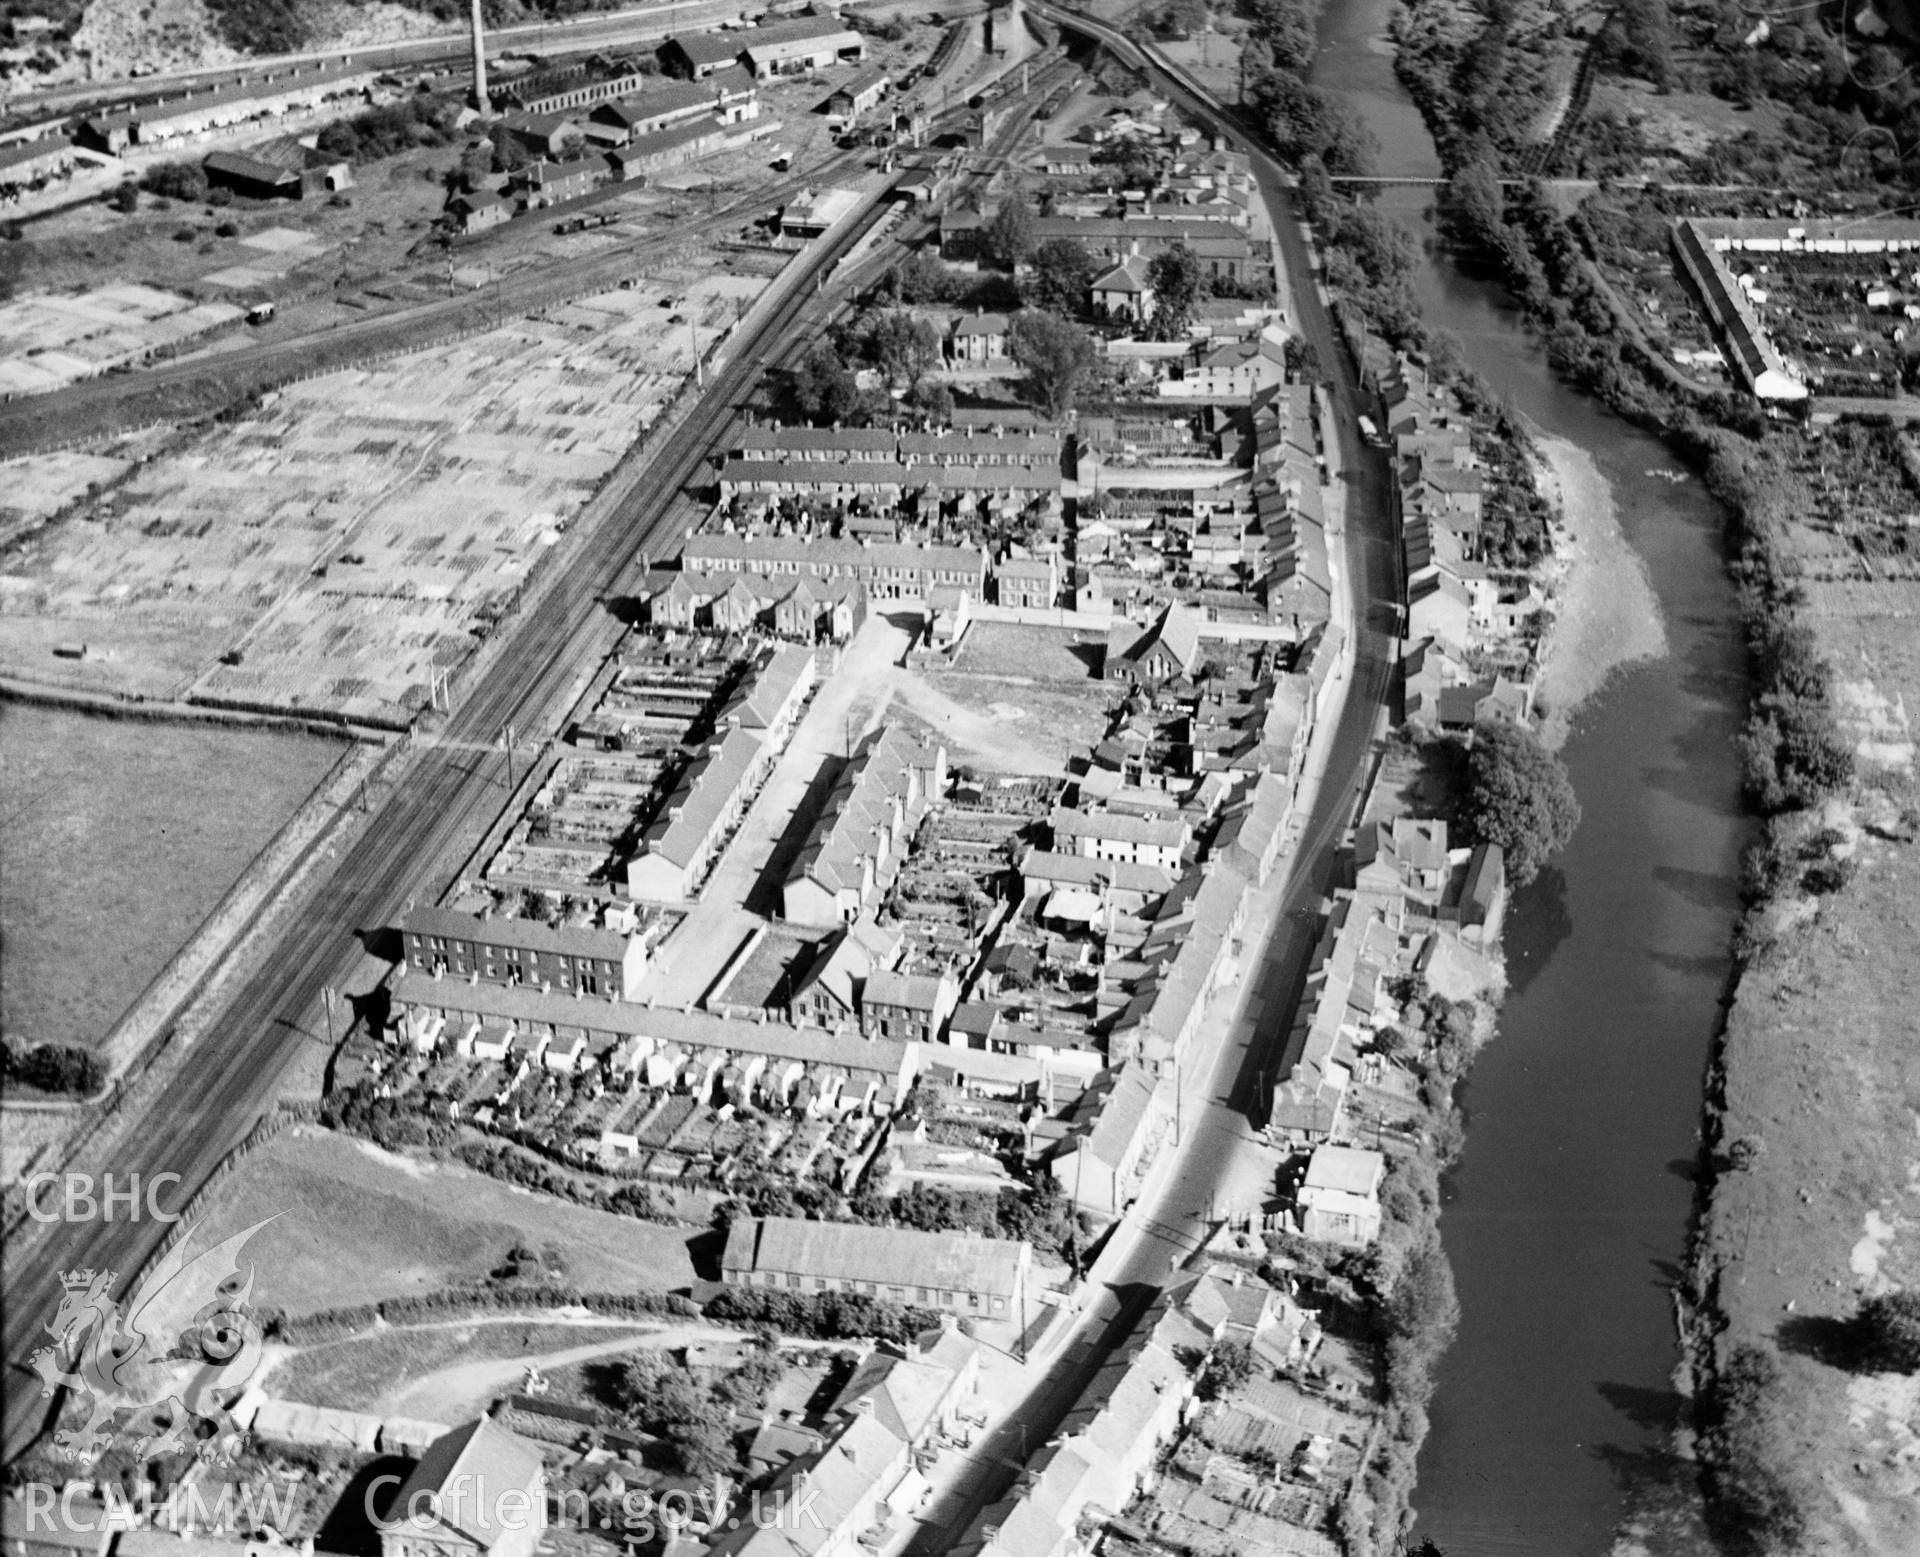 General view of Taffs Well showing housing, Taffs Well station, Glamorganshire Canal and Garth Ironworks, oblique aerial view. 5?x4? black and white glass plate negative.